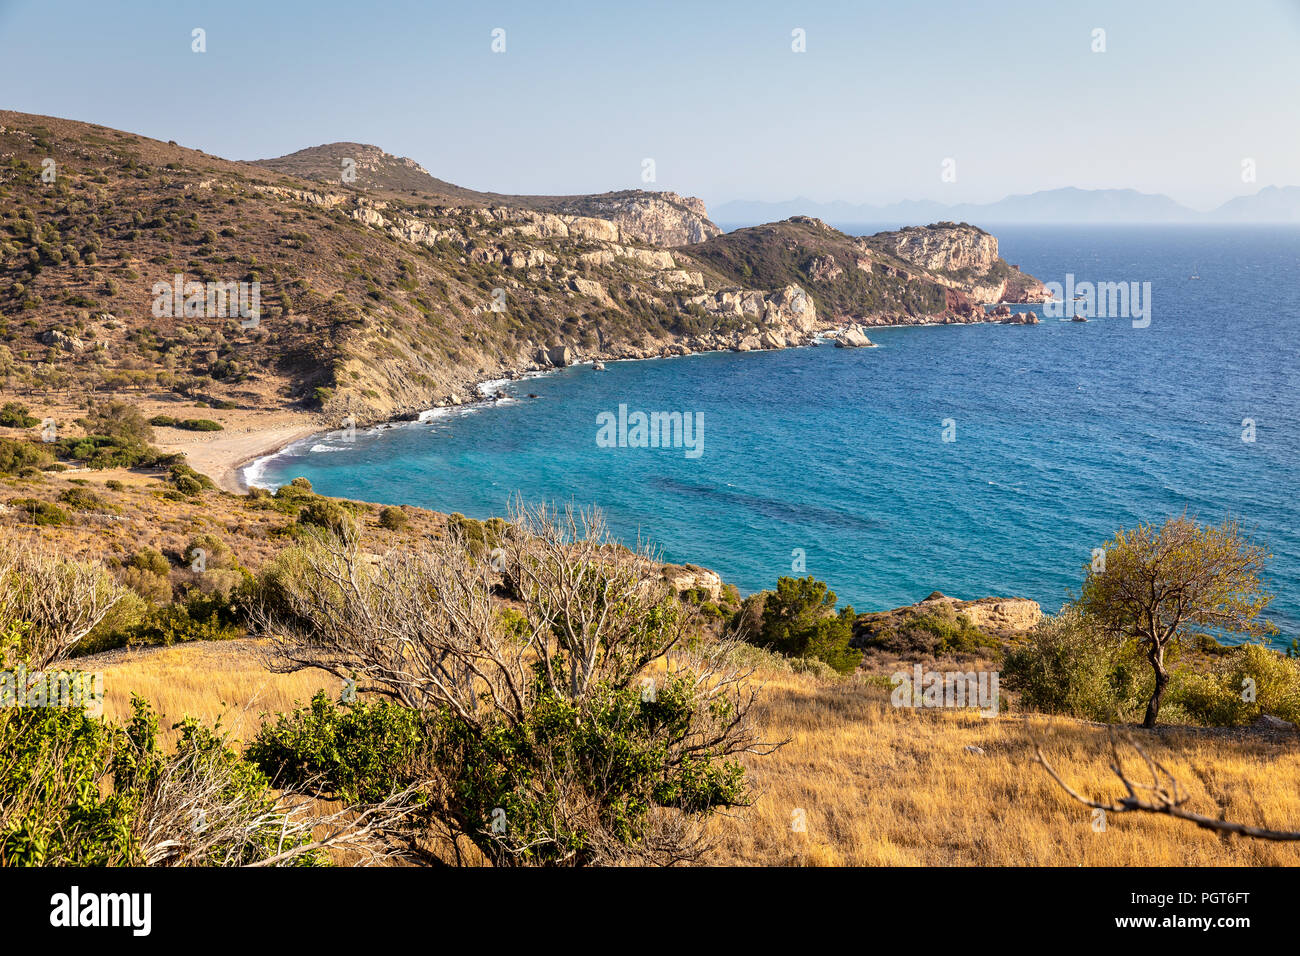 Undiscovered paradise beach with emerald waters on the way the historic city of Knidos in Datca peninsula, Mugla,Turkey. Stock Photo